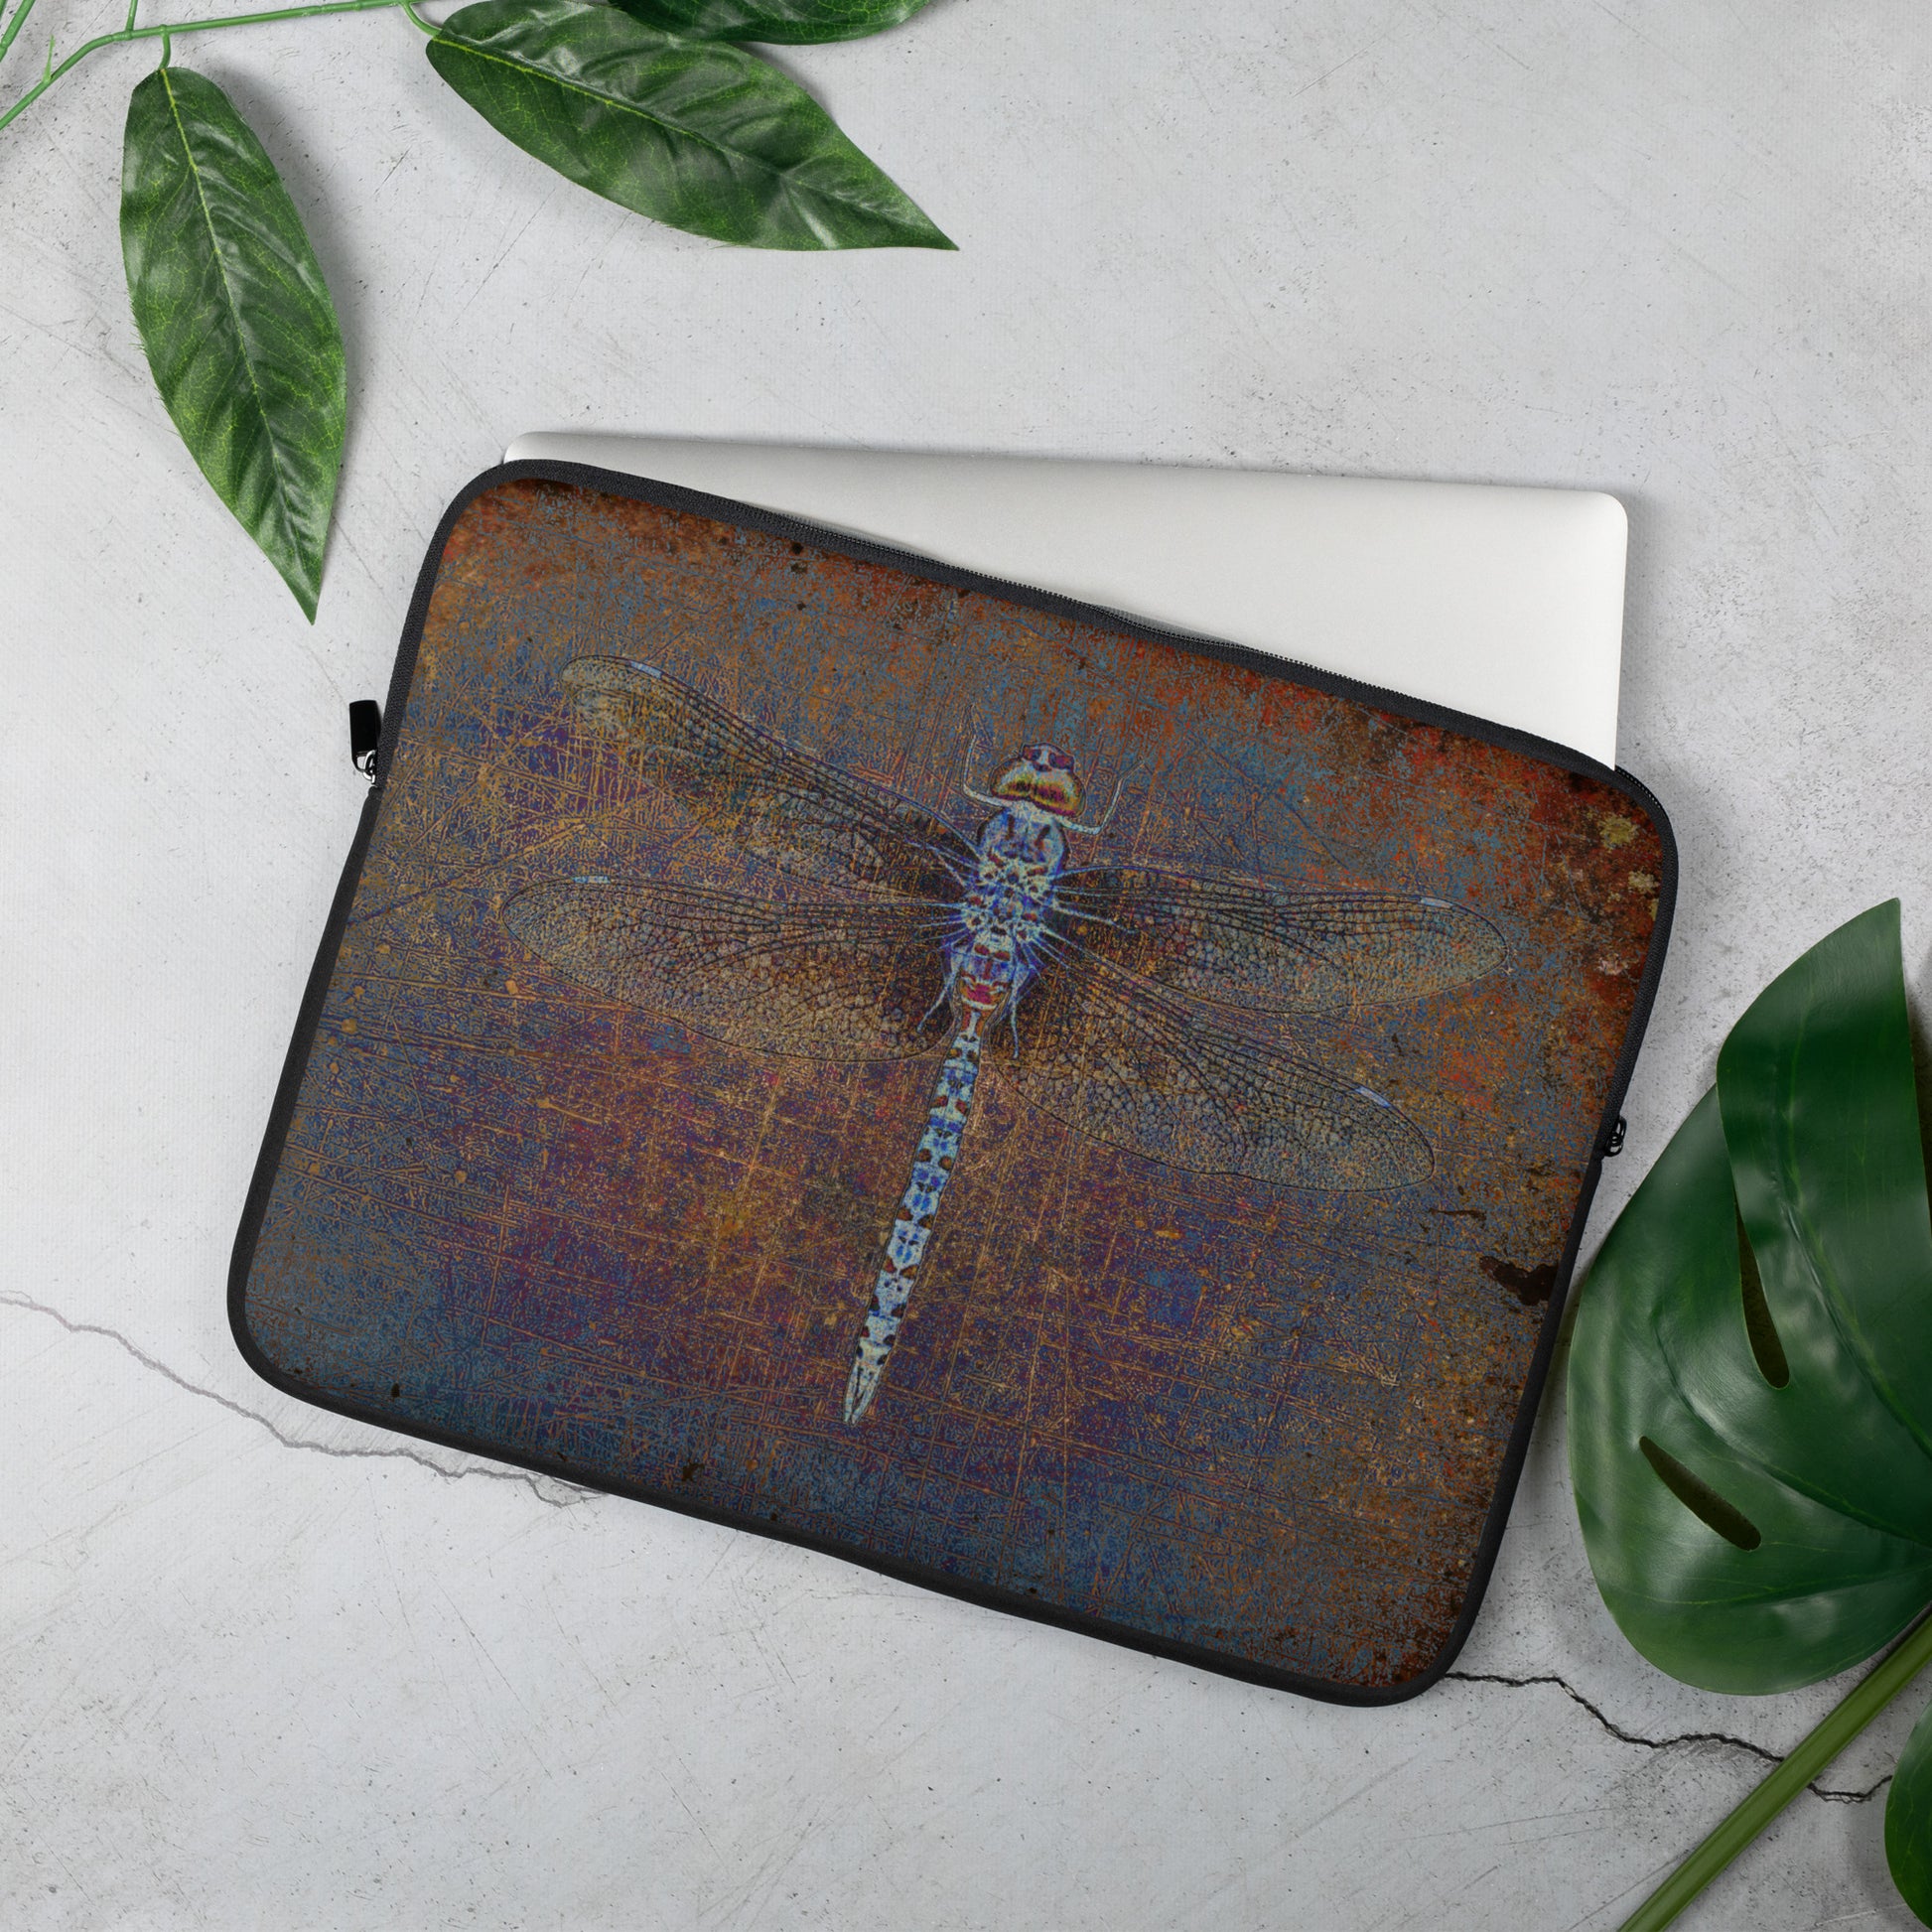 Dragonfly on Distressed Purple Background Laptop Sleeve - Mac Book sleeve - Surface Sleeve 15 inches